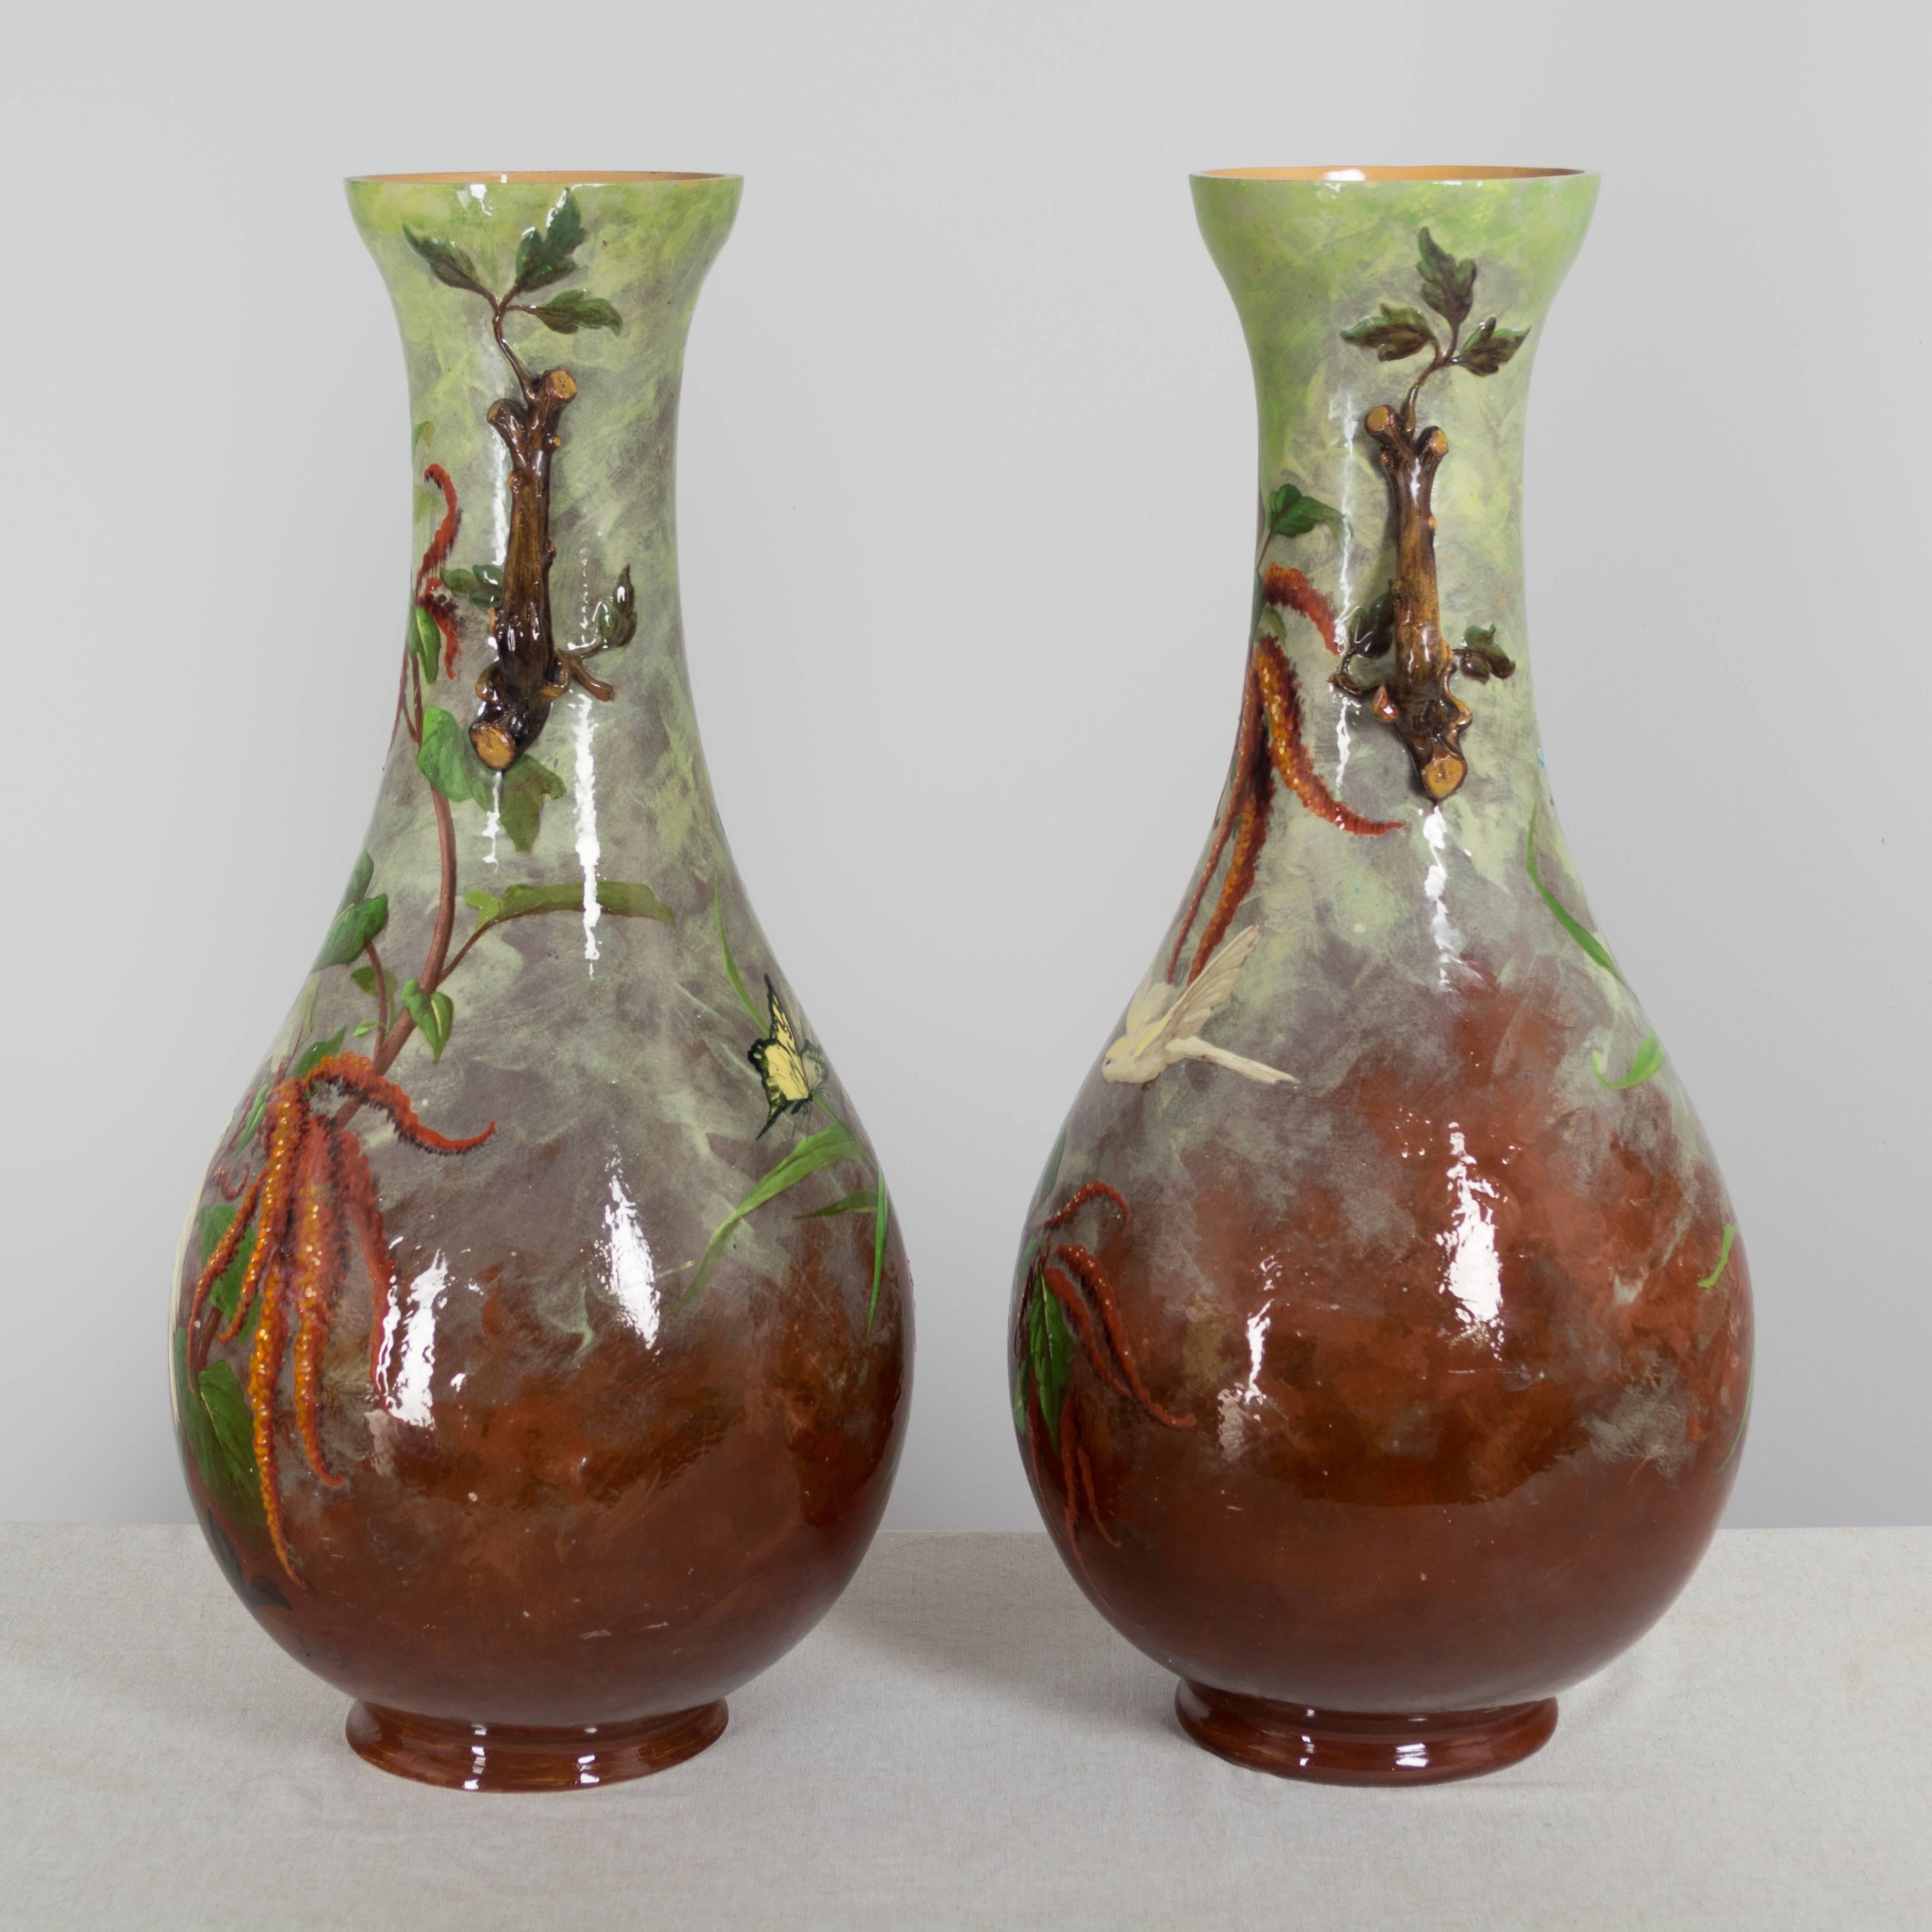 Pair of large French faience vases signed Belat. Beautifully decorated with pale yellow birds on a burgundy and green ground. The rim of one vase has been professionally restored.
Marks on the bottom are numbers.
Each weighs about 19lbs.
More photos